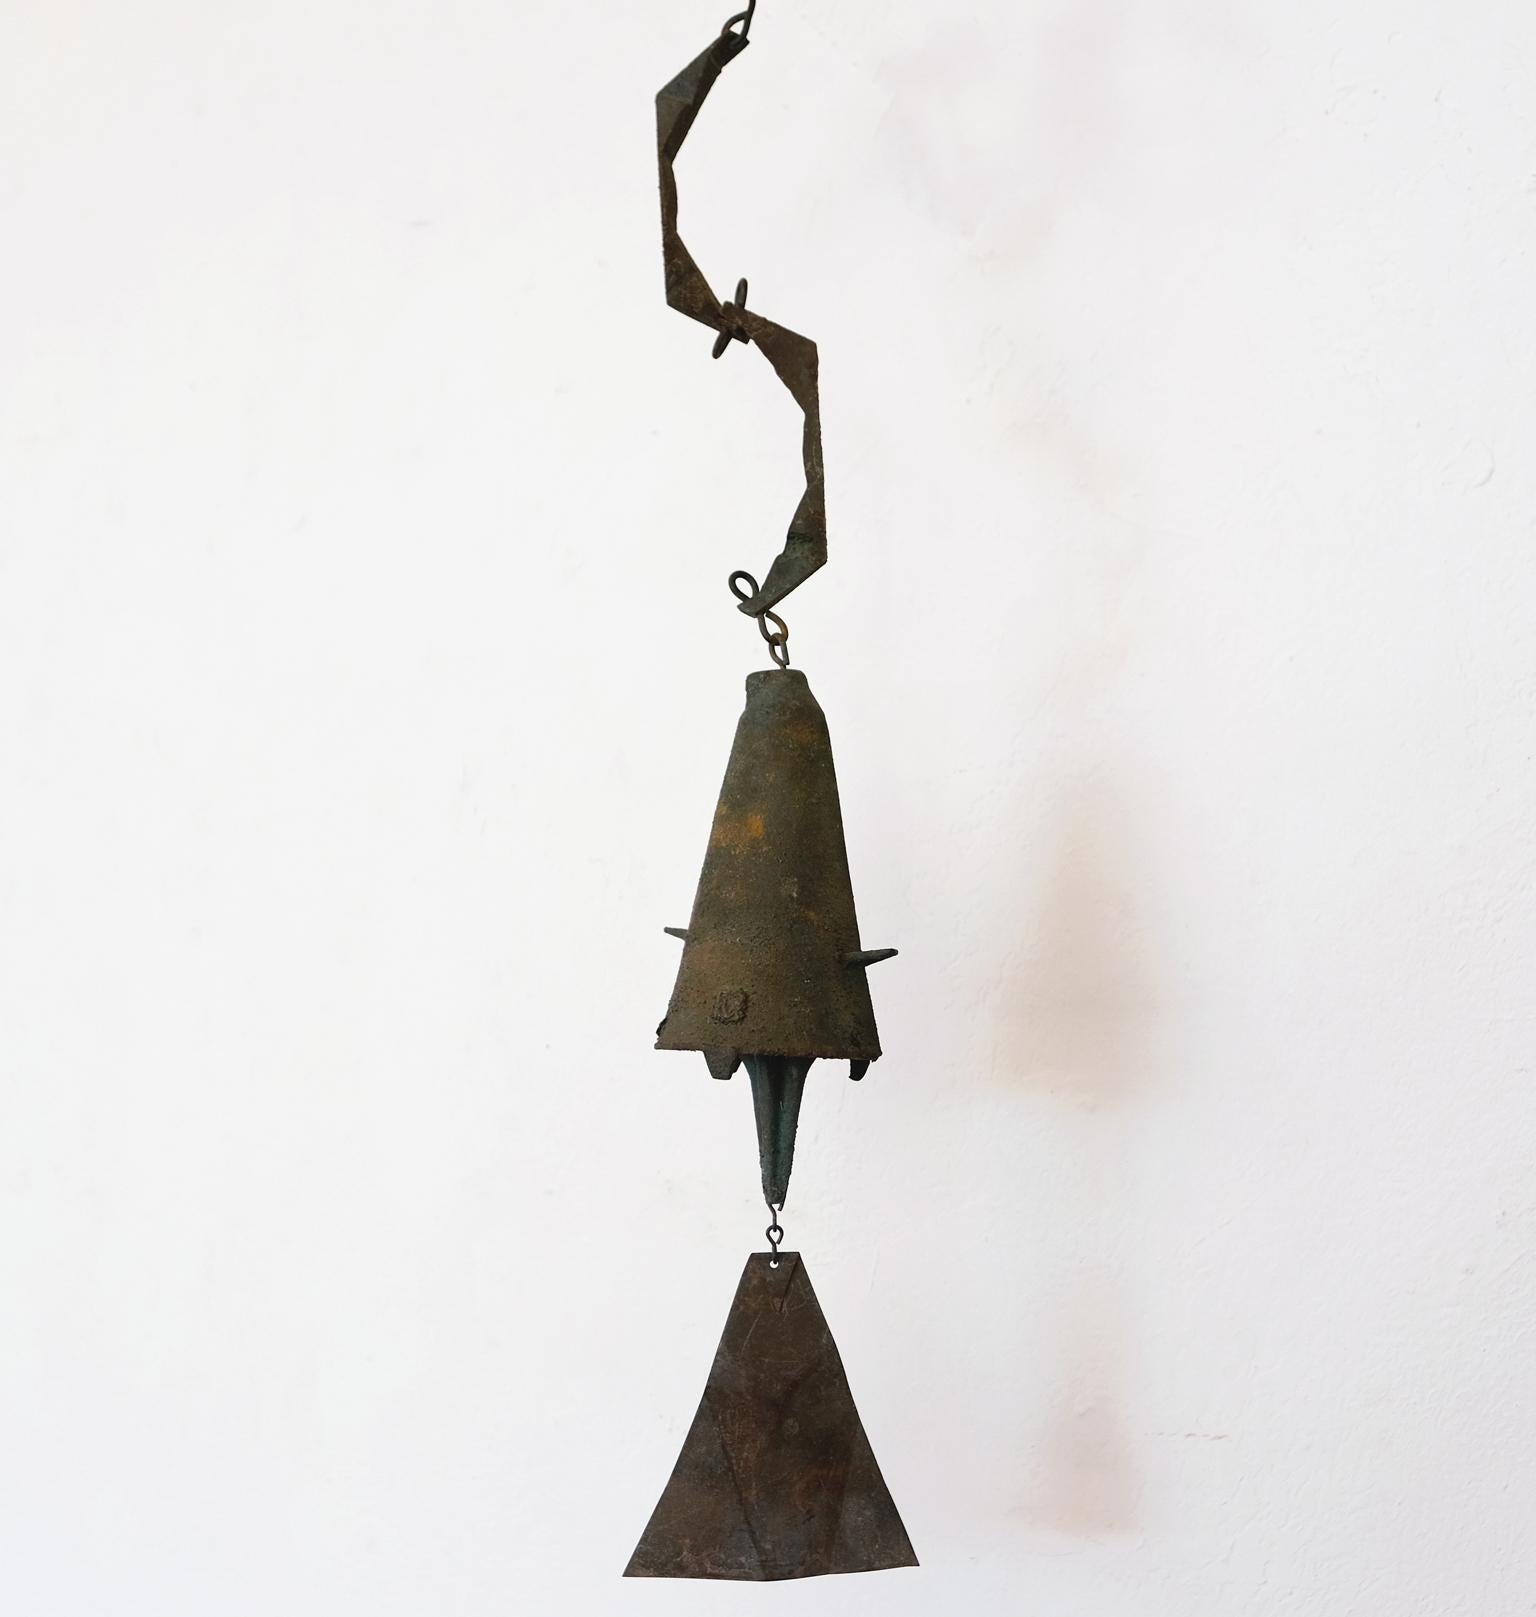 Early bronze sculptural wind chime or bell by Italian-born visionary architect and artist, Paolo Soleri. This piece was made by the artist at his Cosanti studio in Arizona. The protrusions on the sides are elements only seen in the early bells,